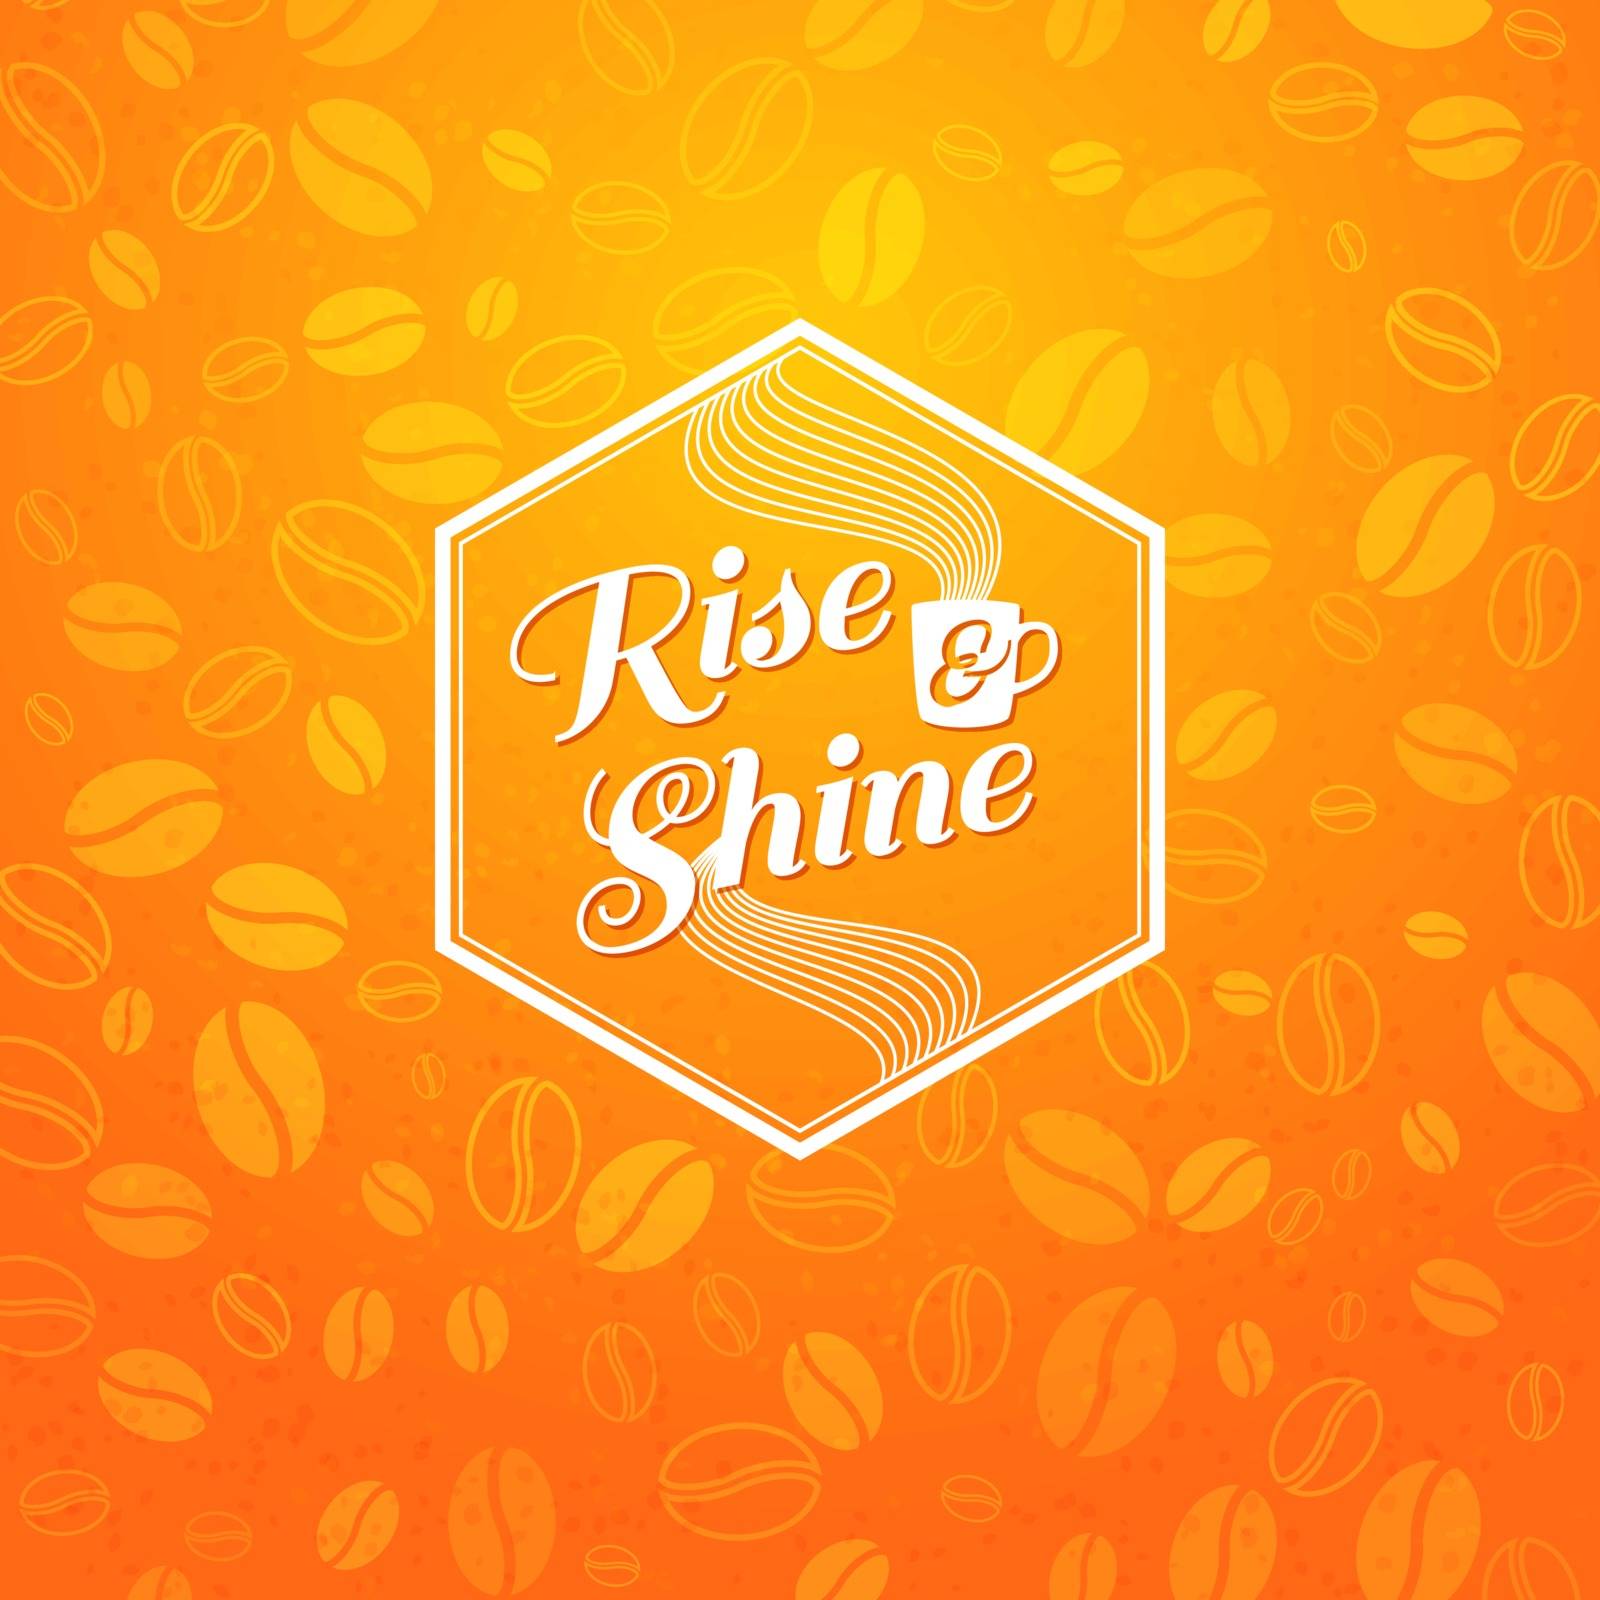 Rise and shine poster. Optimistic morning statement for the whole day long. Vector image. 